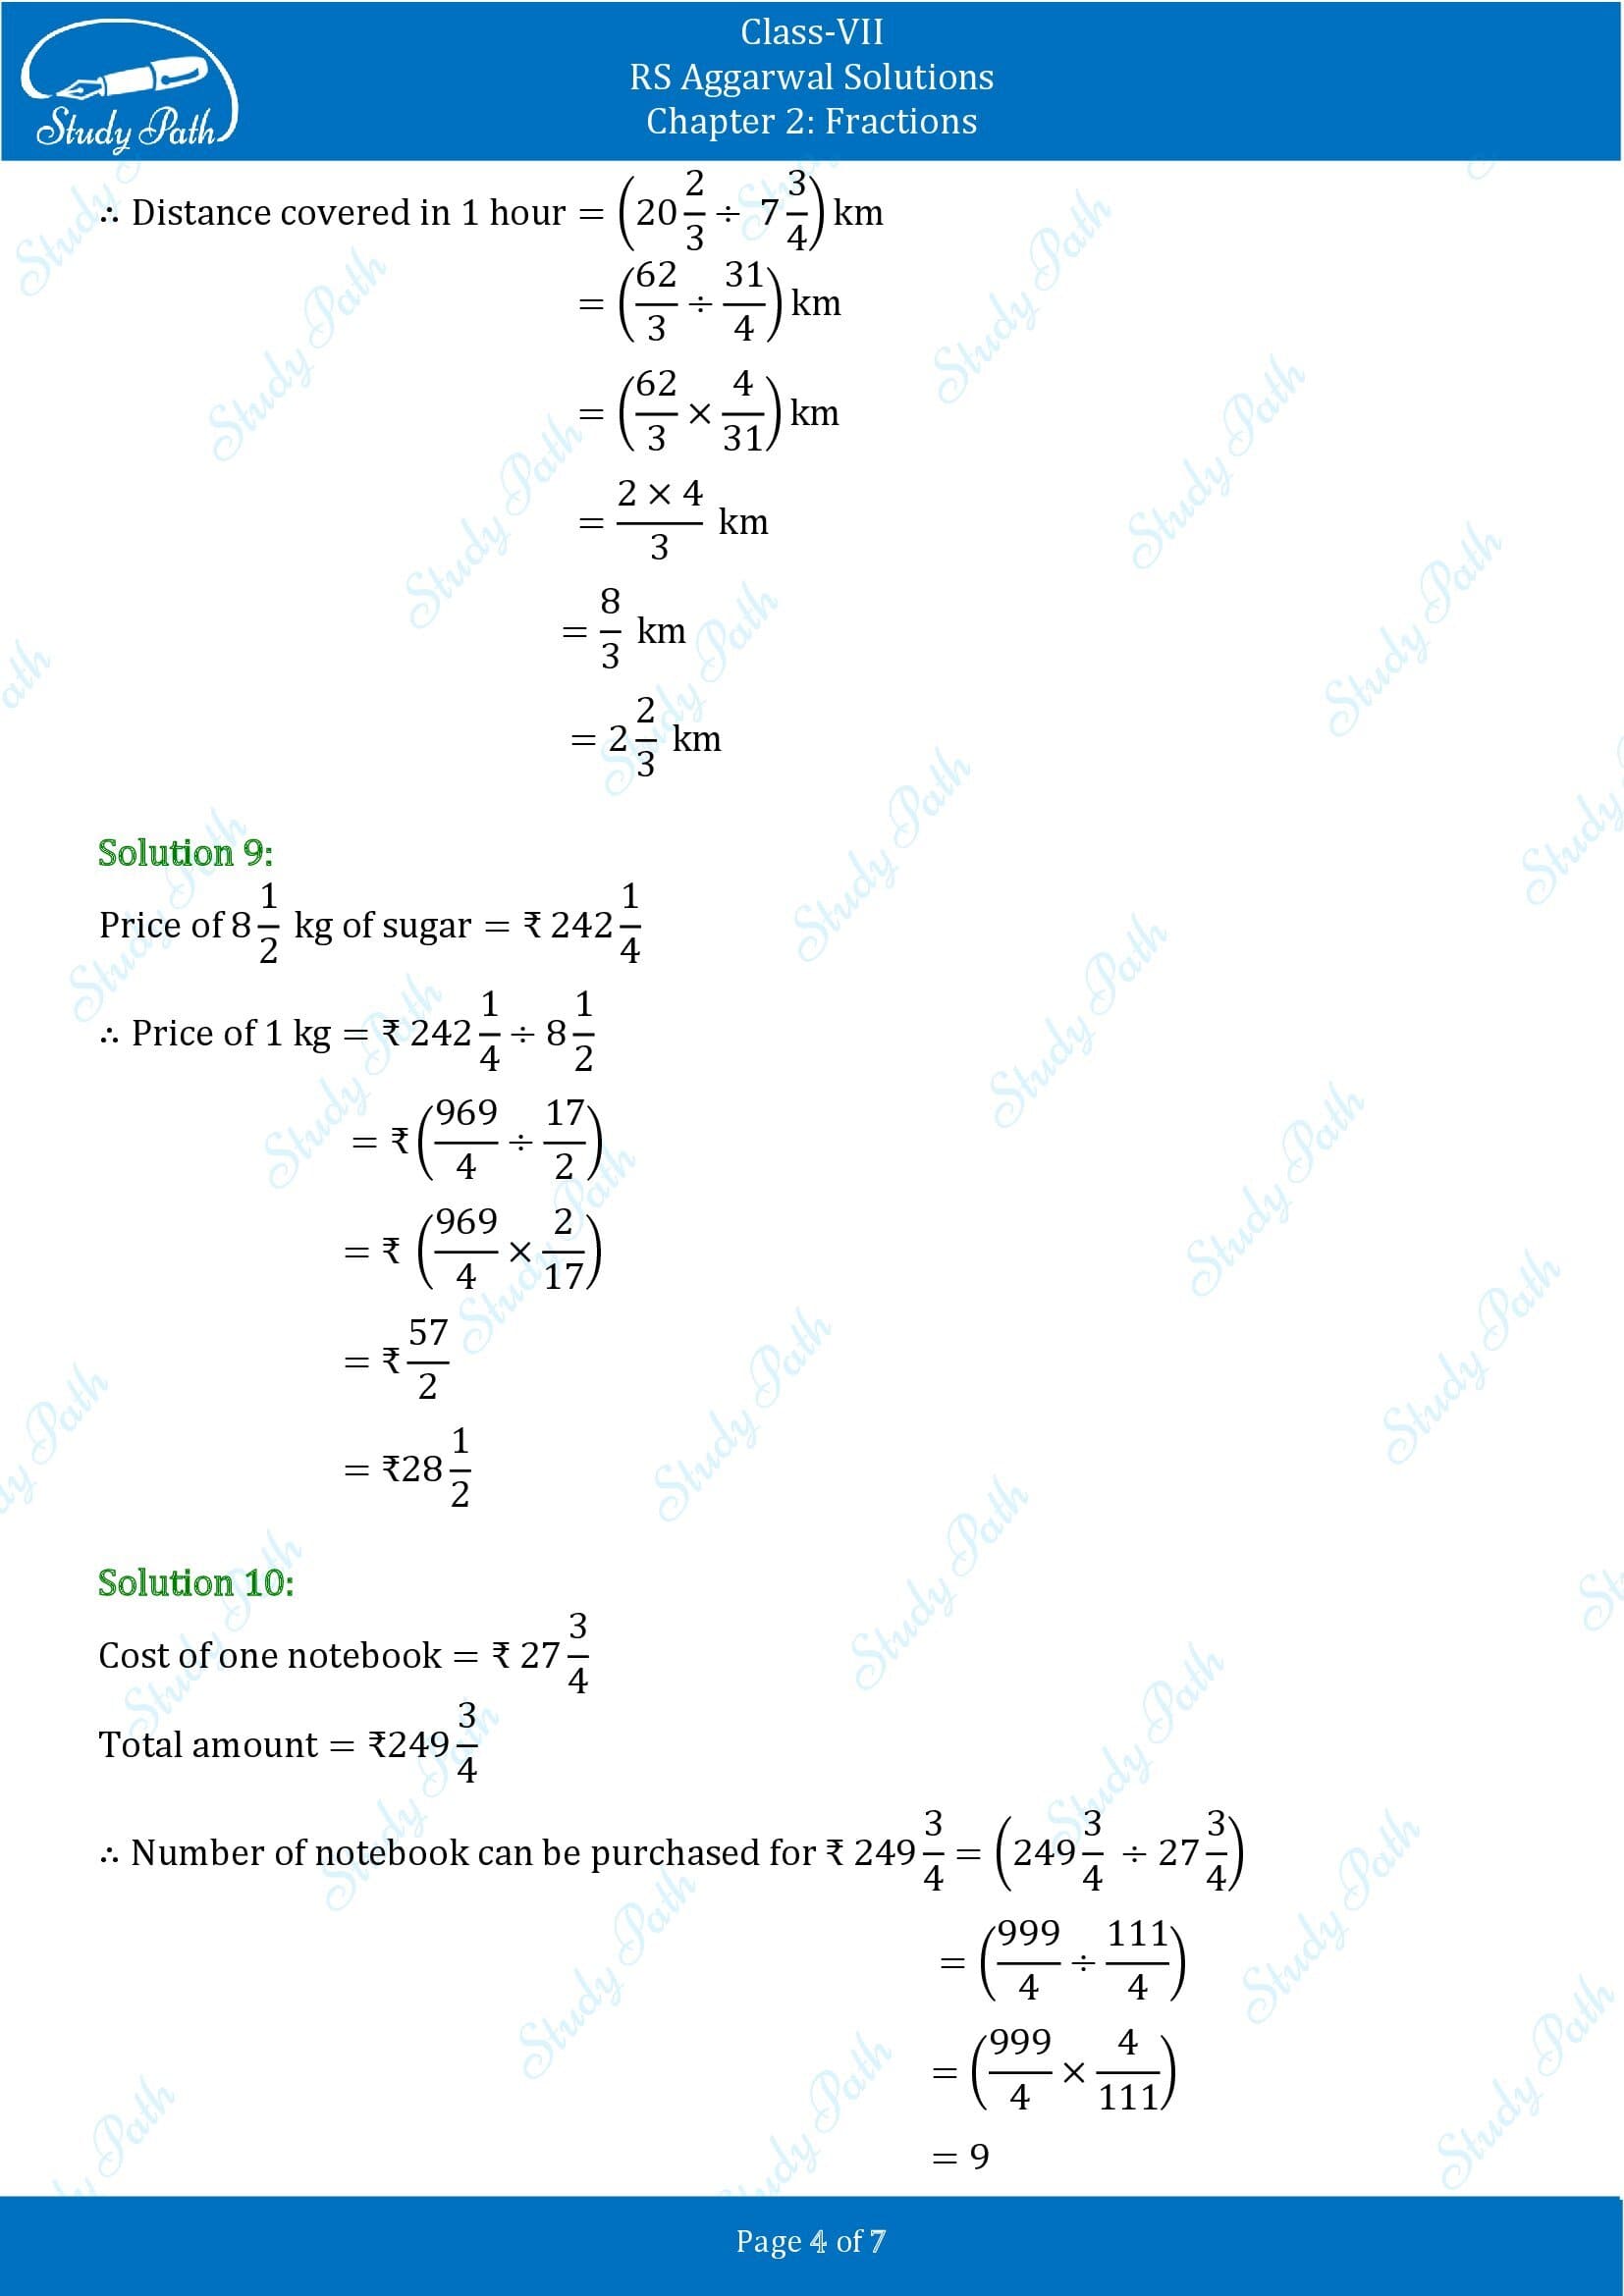 RS Aggarwal Solutions Class 7 Chapter 2 Fractions Exercise 2C 00004